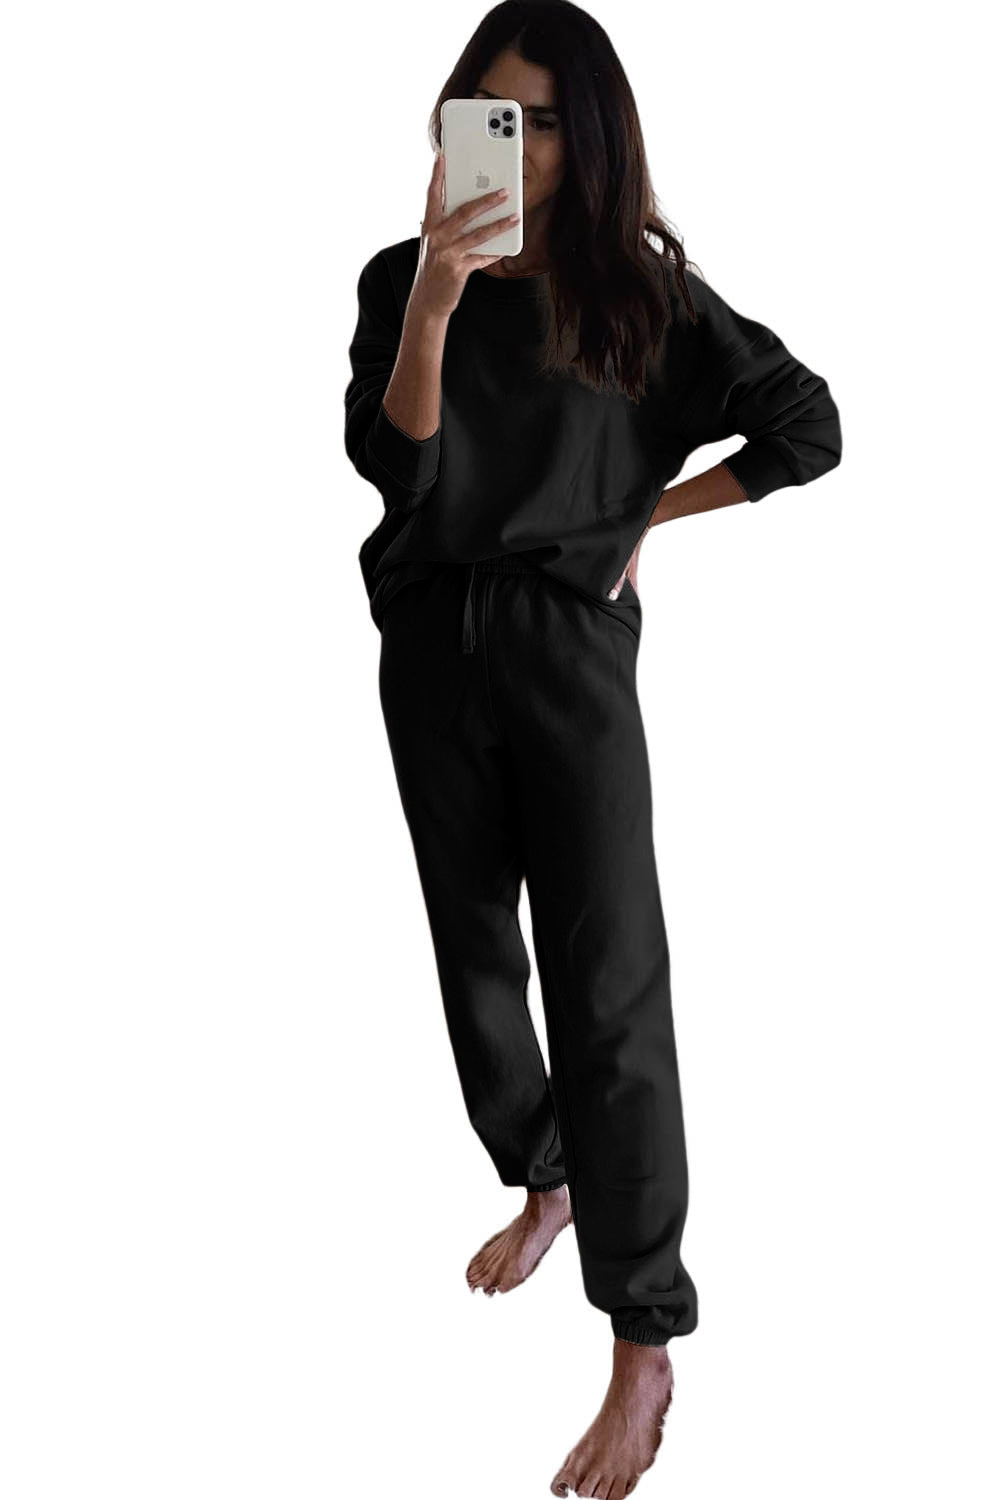 Black Long Sleeve Top and Drawstring Pants Lounge Outfit Loungewear JT's Designer Fashion